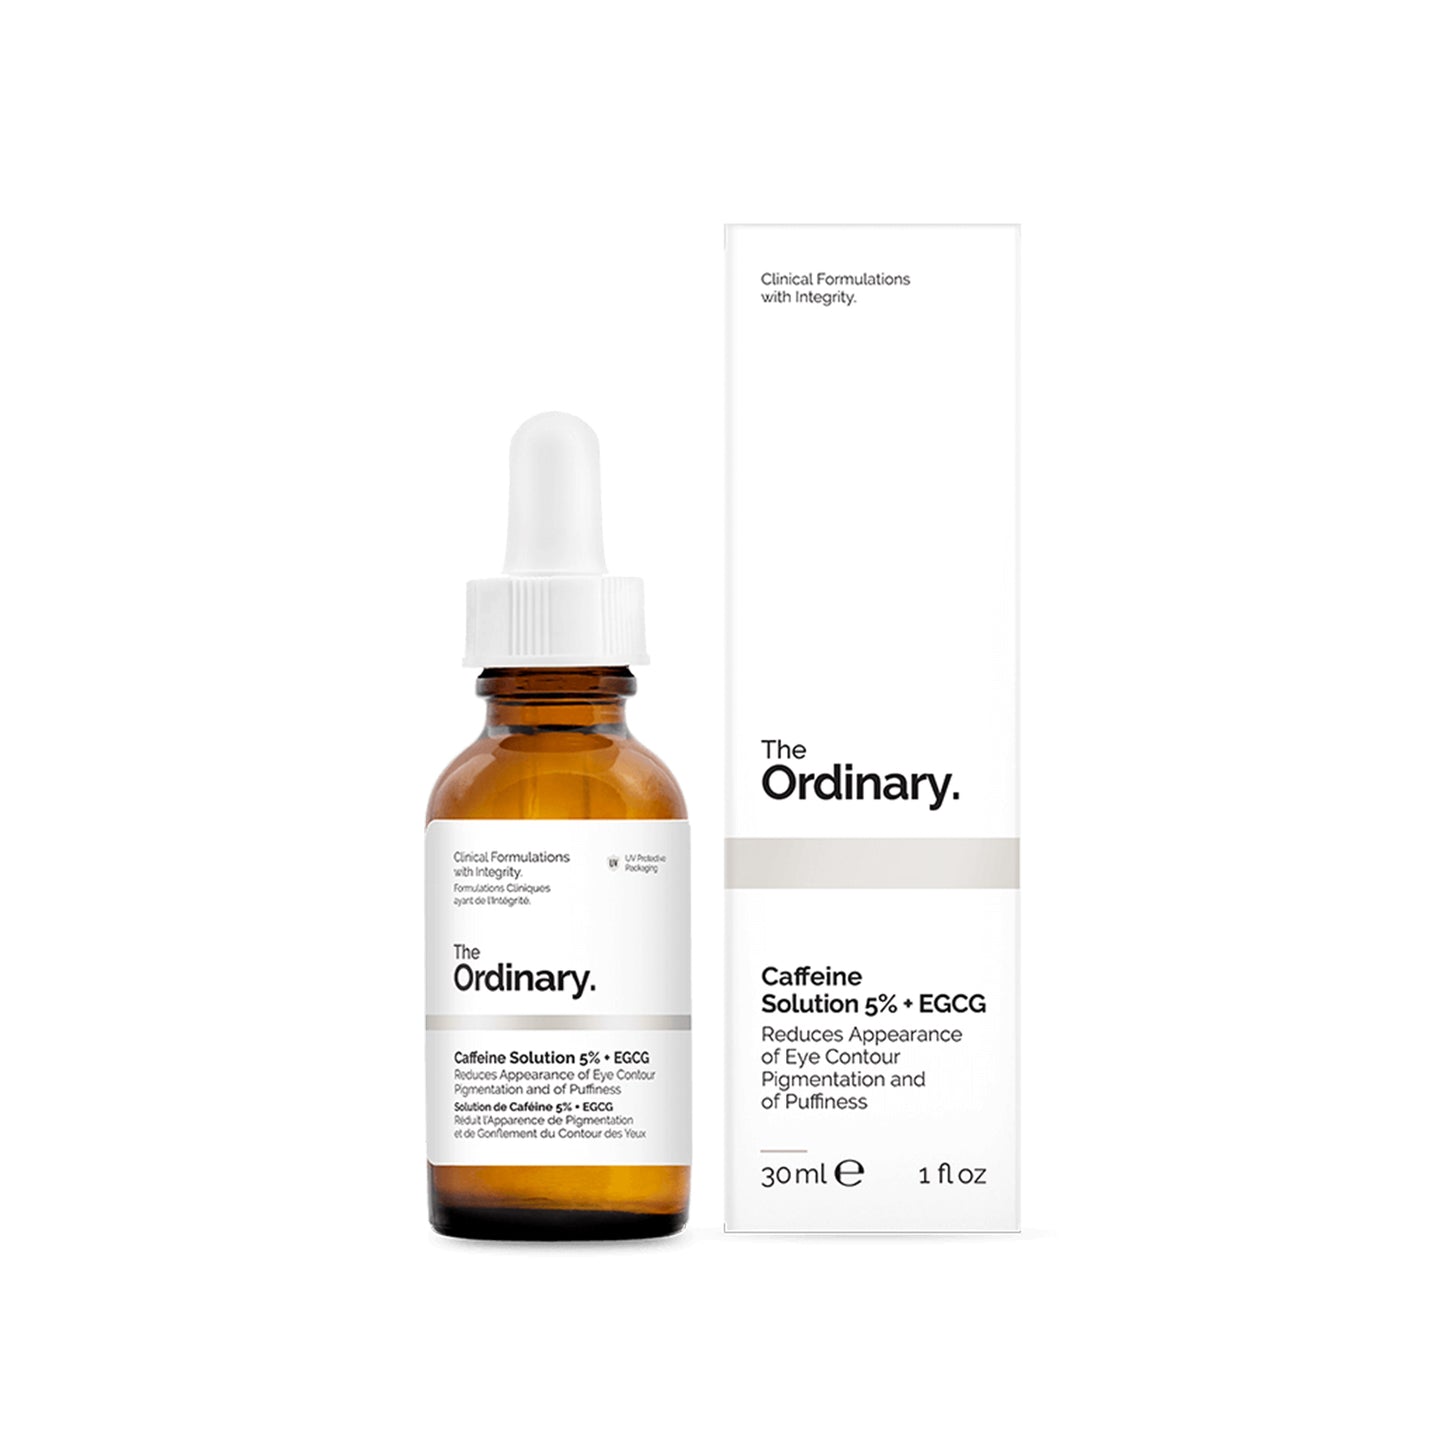 The Ordinary Caffeine Solution 5% + EGCG. Cash on delivery in karachi, lahore, islamabad, pakistan.